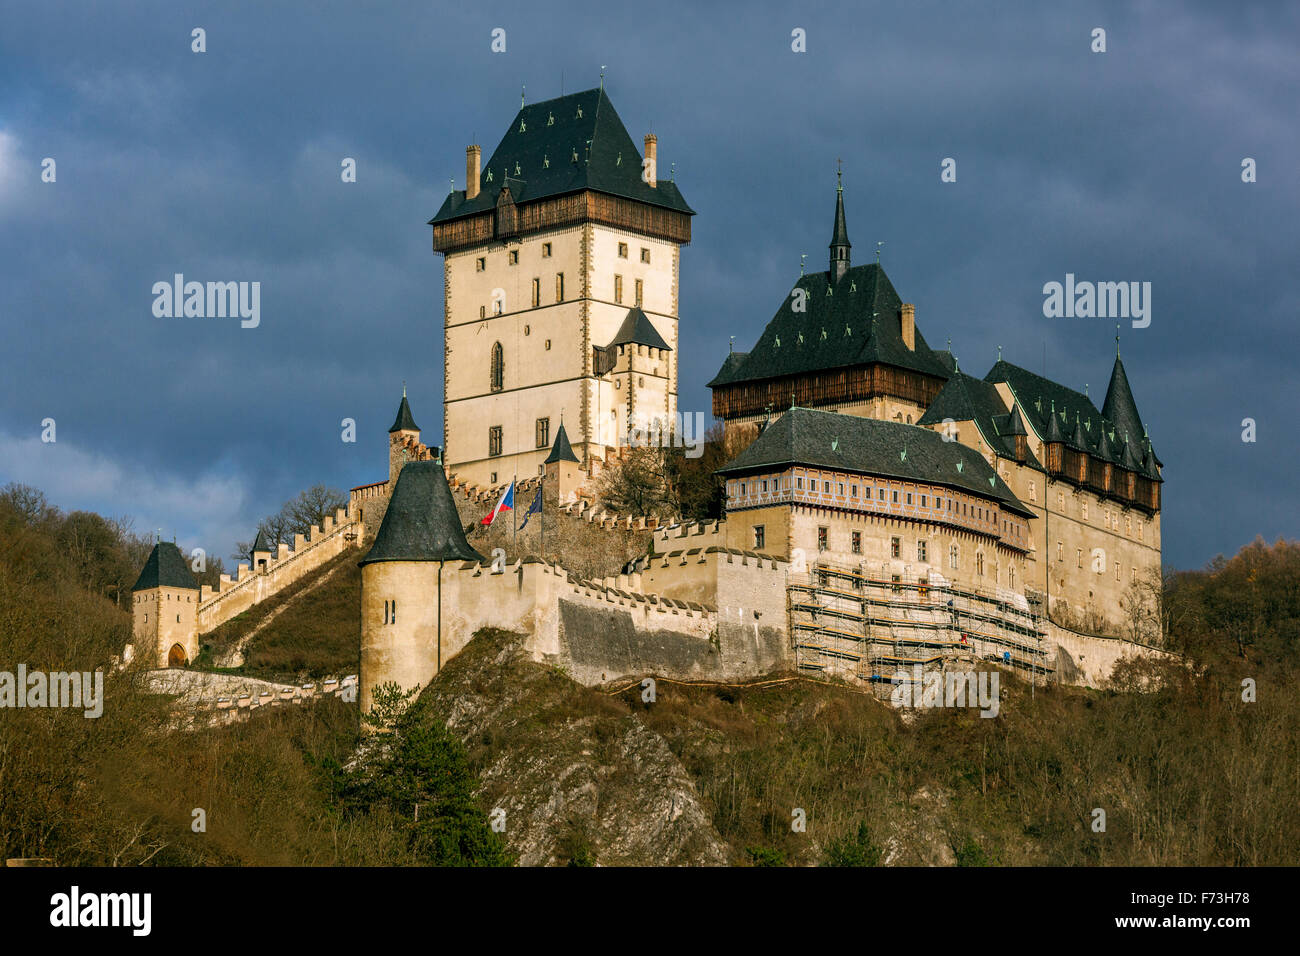 Karlstejn Castle is a large Royal Gothic castle founded 1348 CE by Charles IV, Holy Roman Emperor and King of Bohemia. Czech Republic Stock Photo